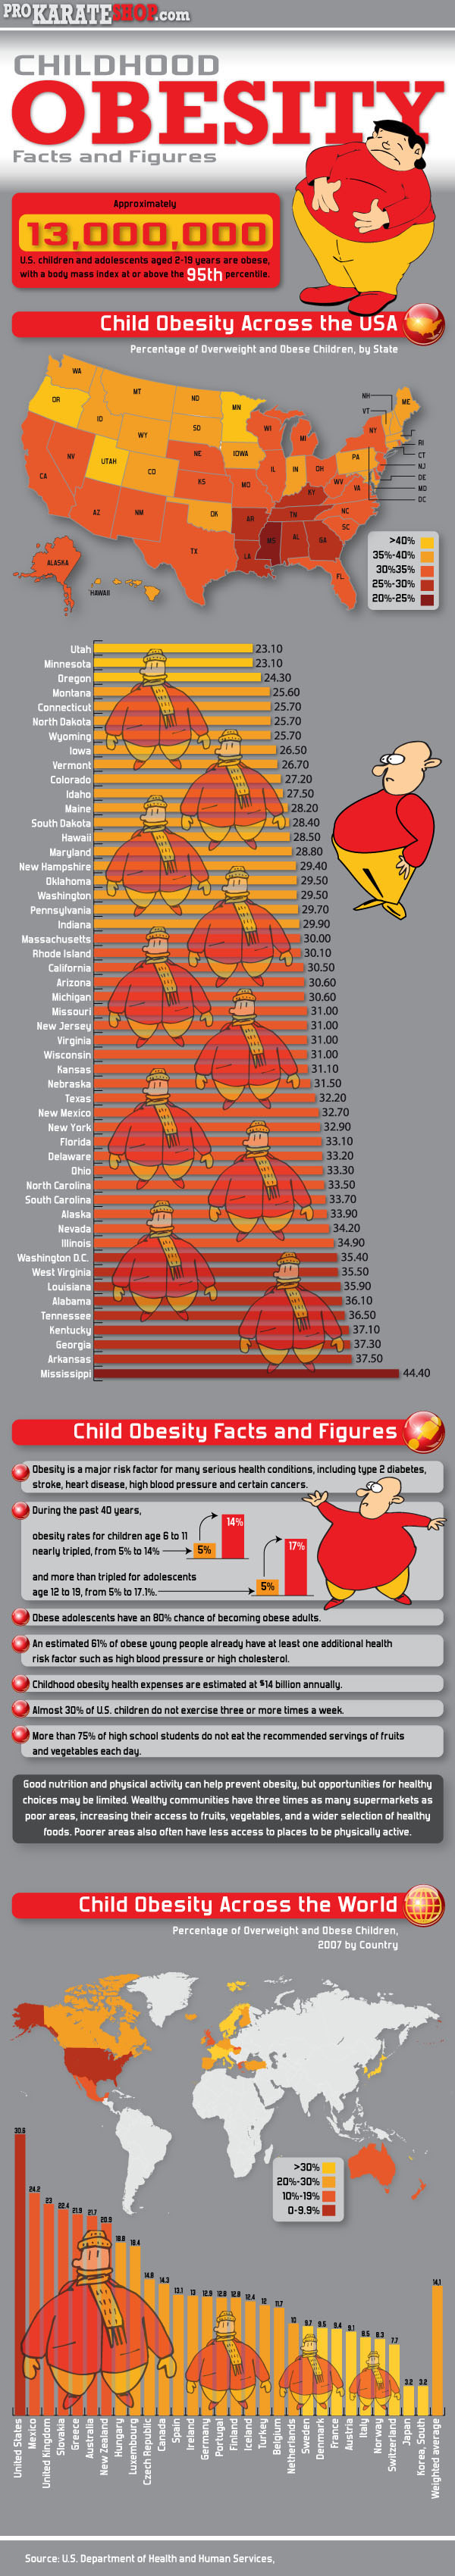 Childhood Obesity Facts and Statistics